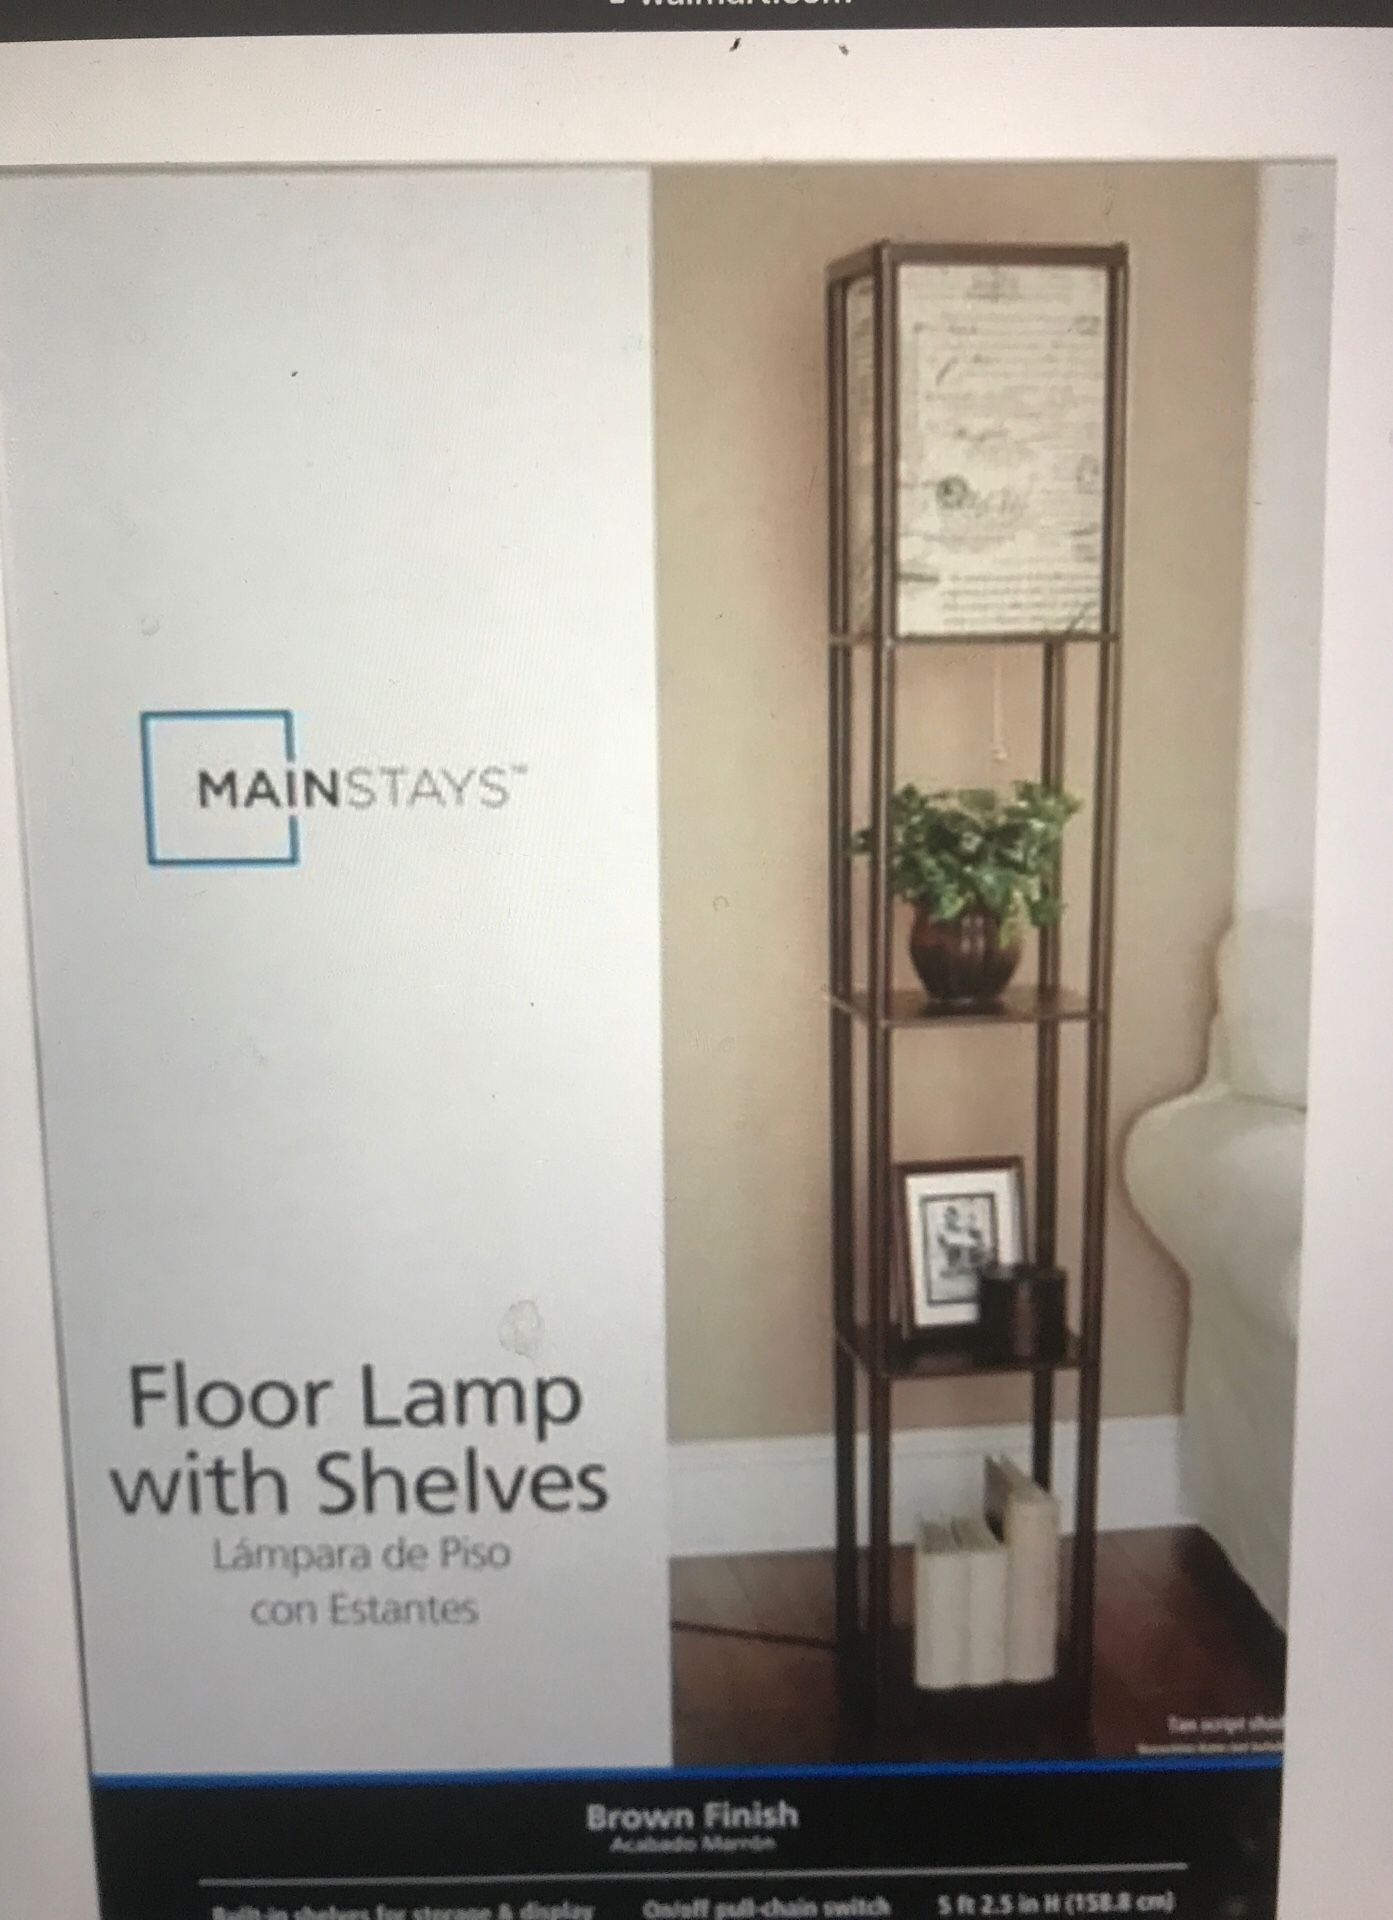 Floor lamps brown with shelf’s and script shade.